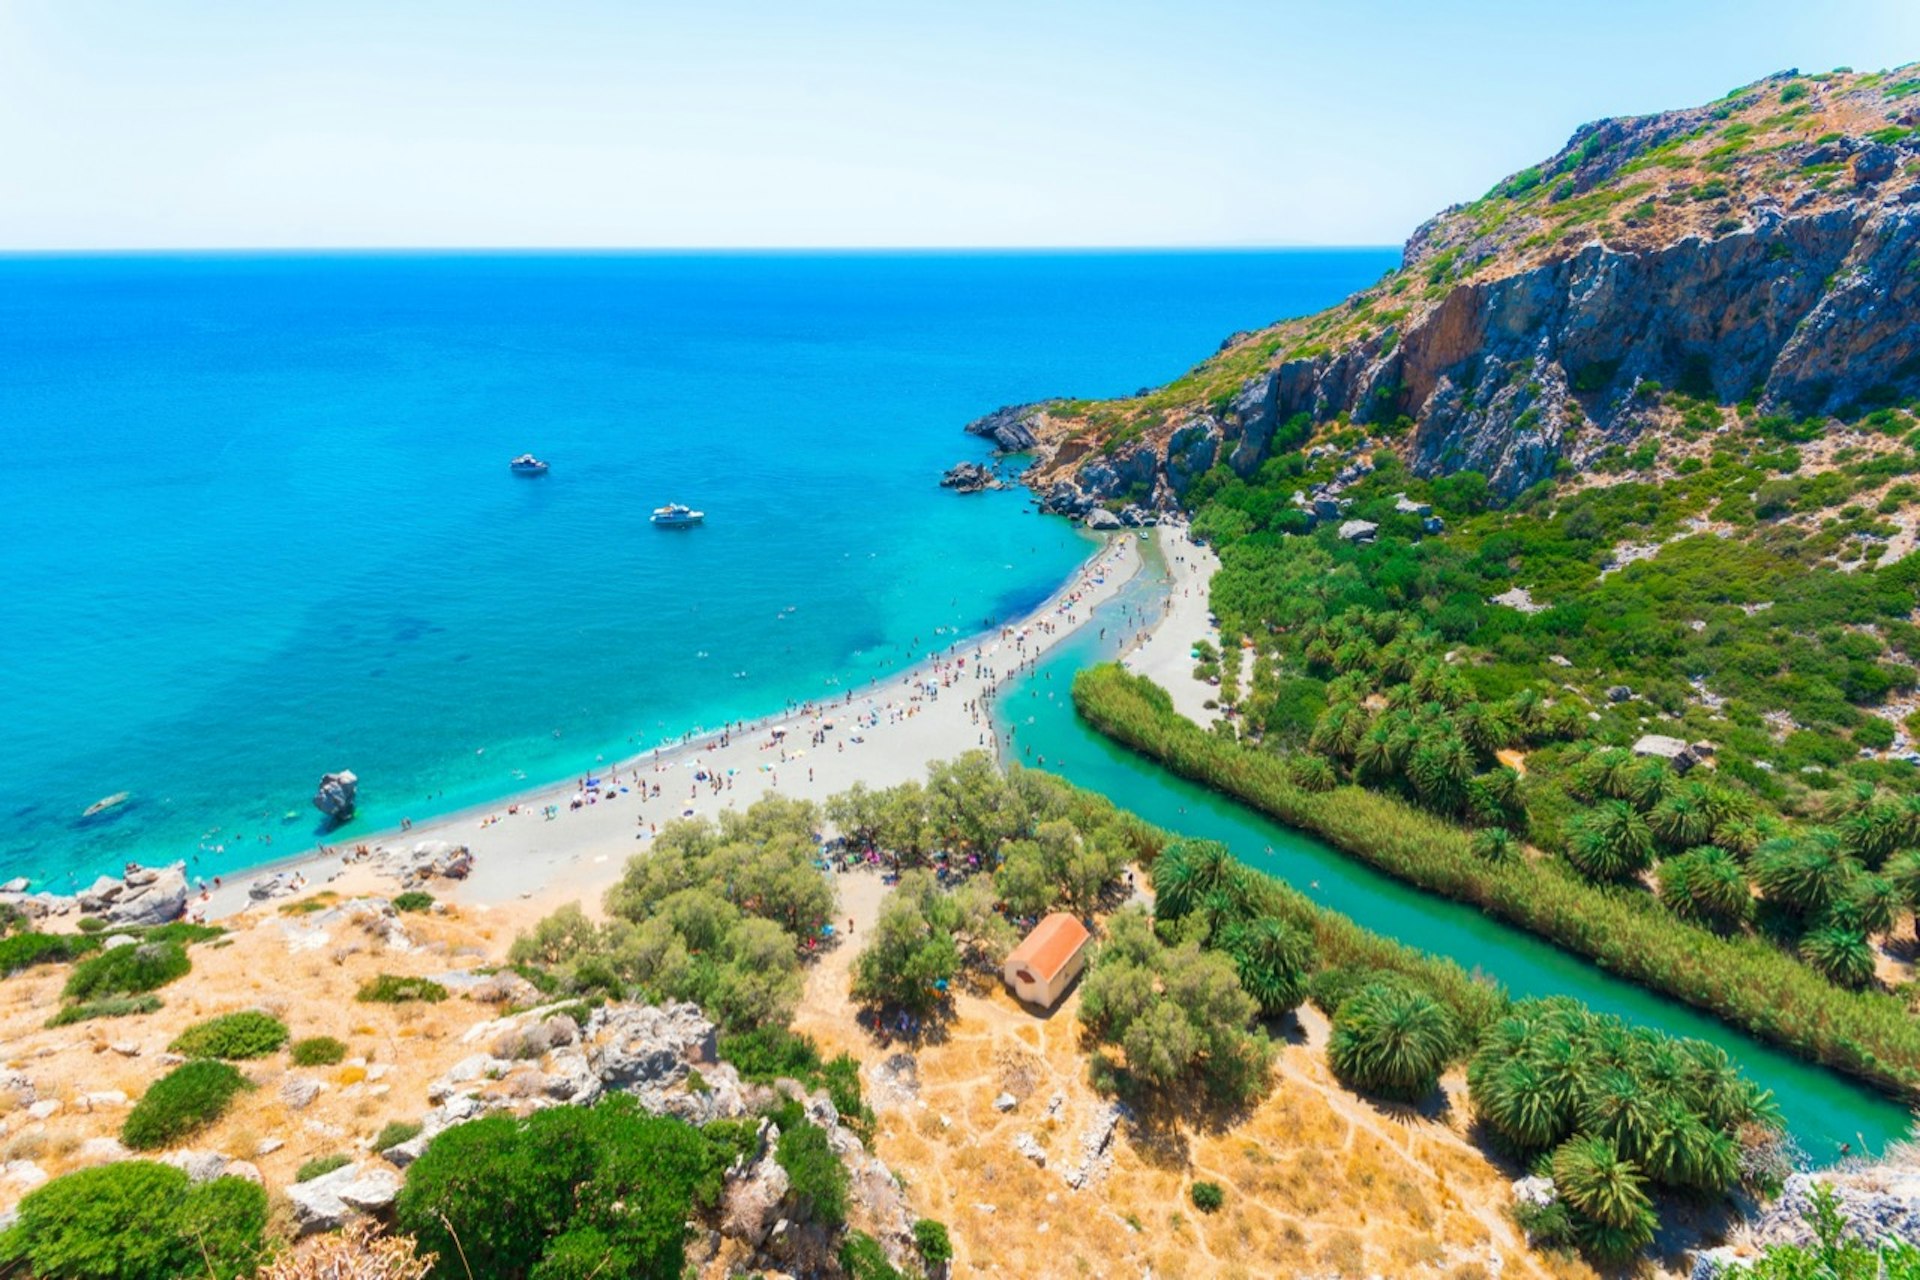 View of Preveli beach at the Libyan Sea, with a river and palm forest, in southern Crete, Greece.